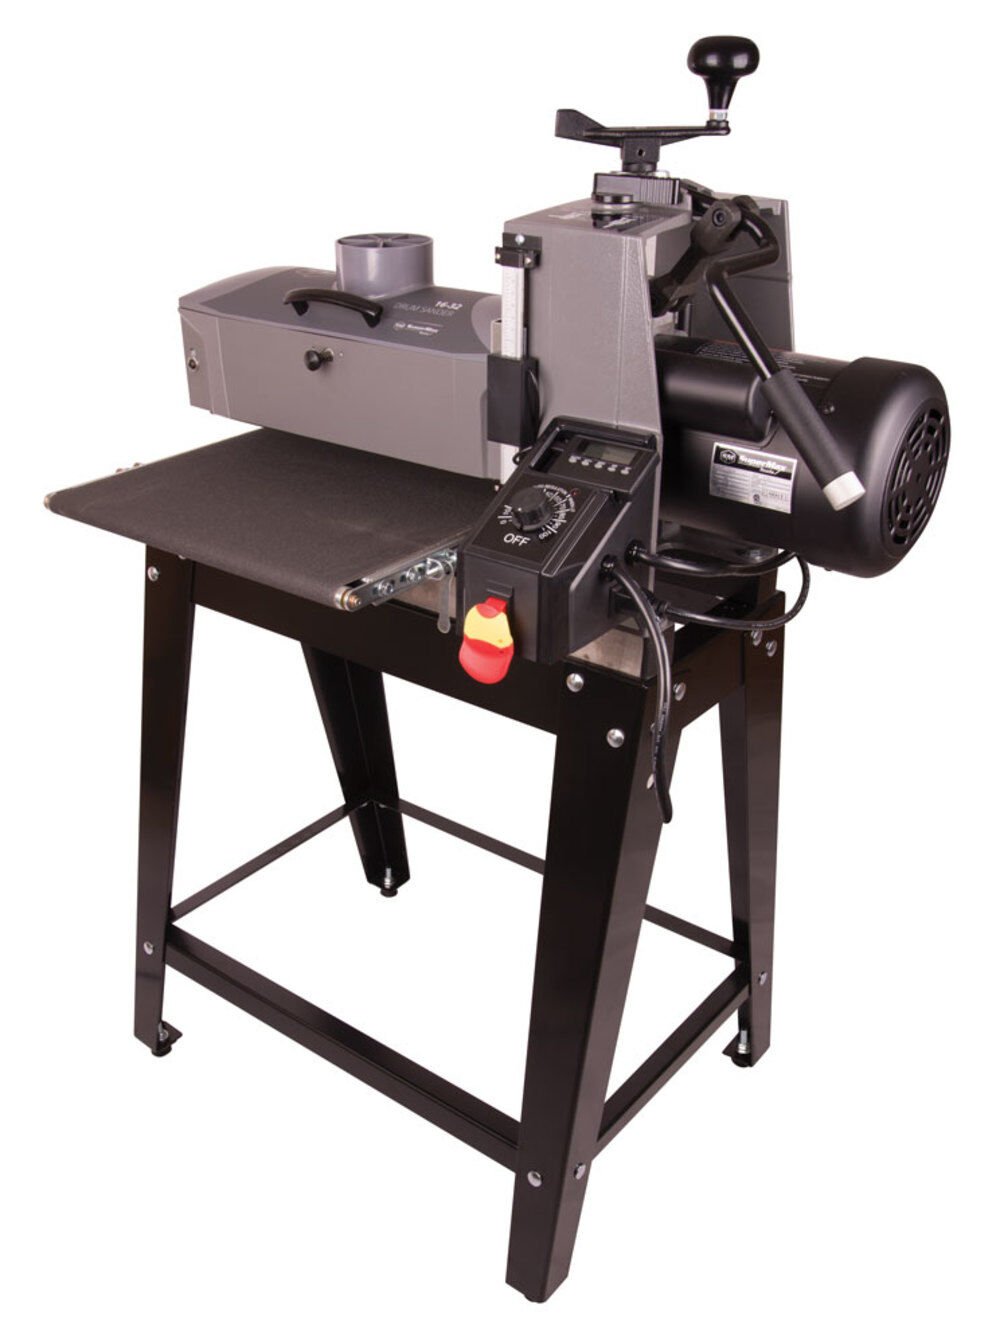 Supermax Tools 16-32 Drum Sander with Stand 71632 - Acme Tools